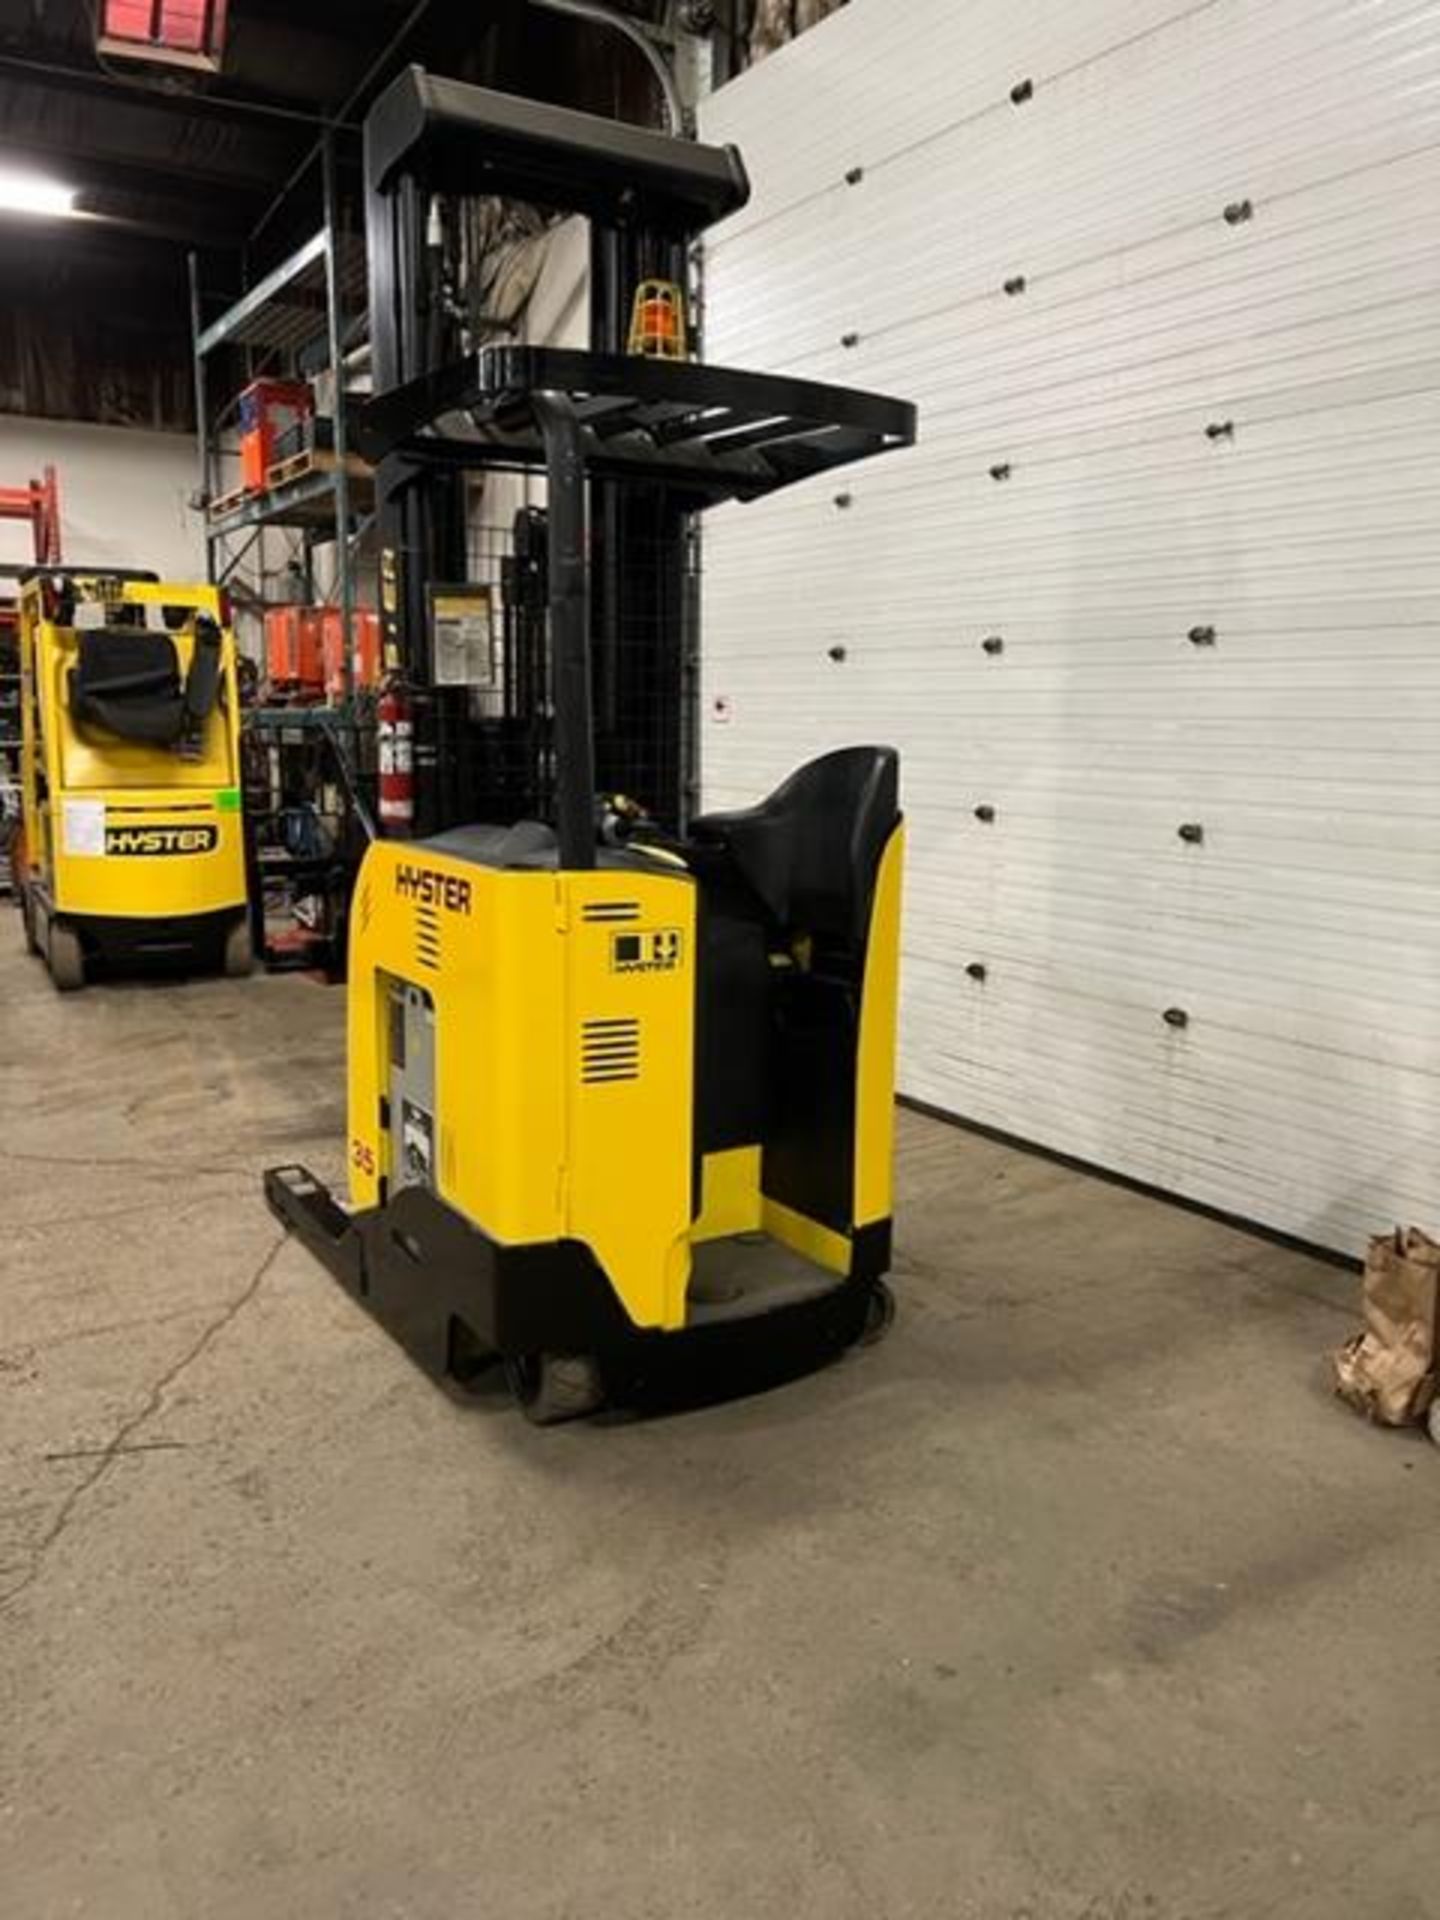 FREE CUSTOMS - 2015 Hyster 35 EXTRA Reach Truck Pallet Lifter 3500lbs capacity electric MINT machine - Image 3 of 3